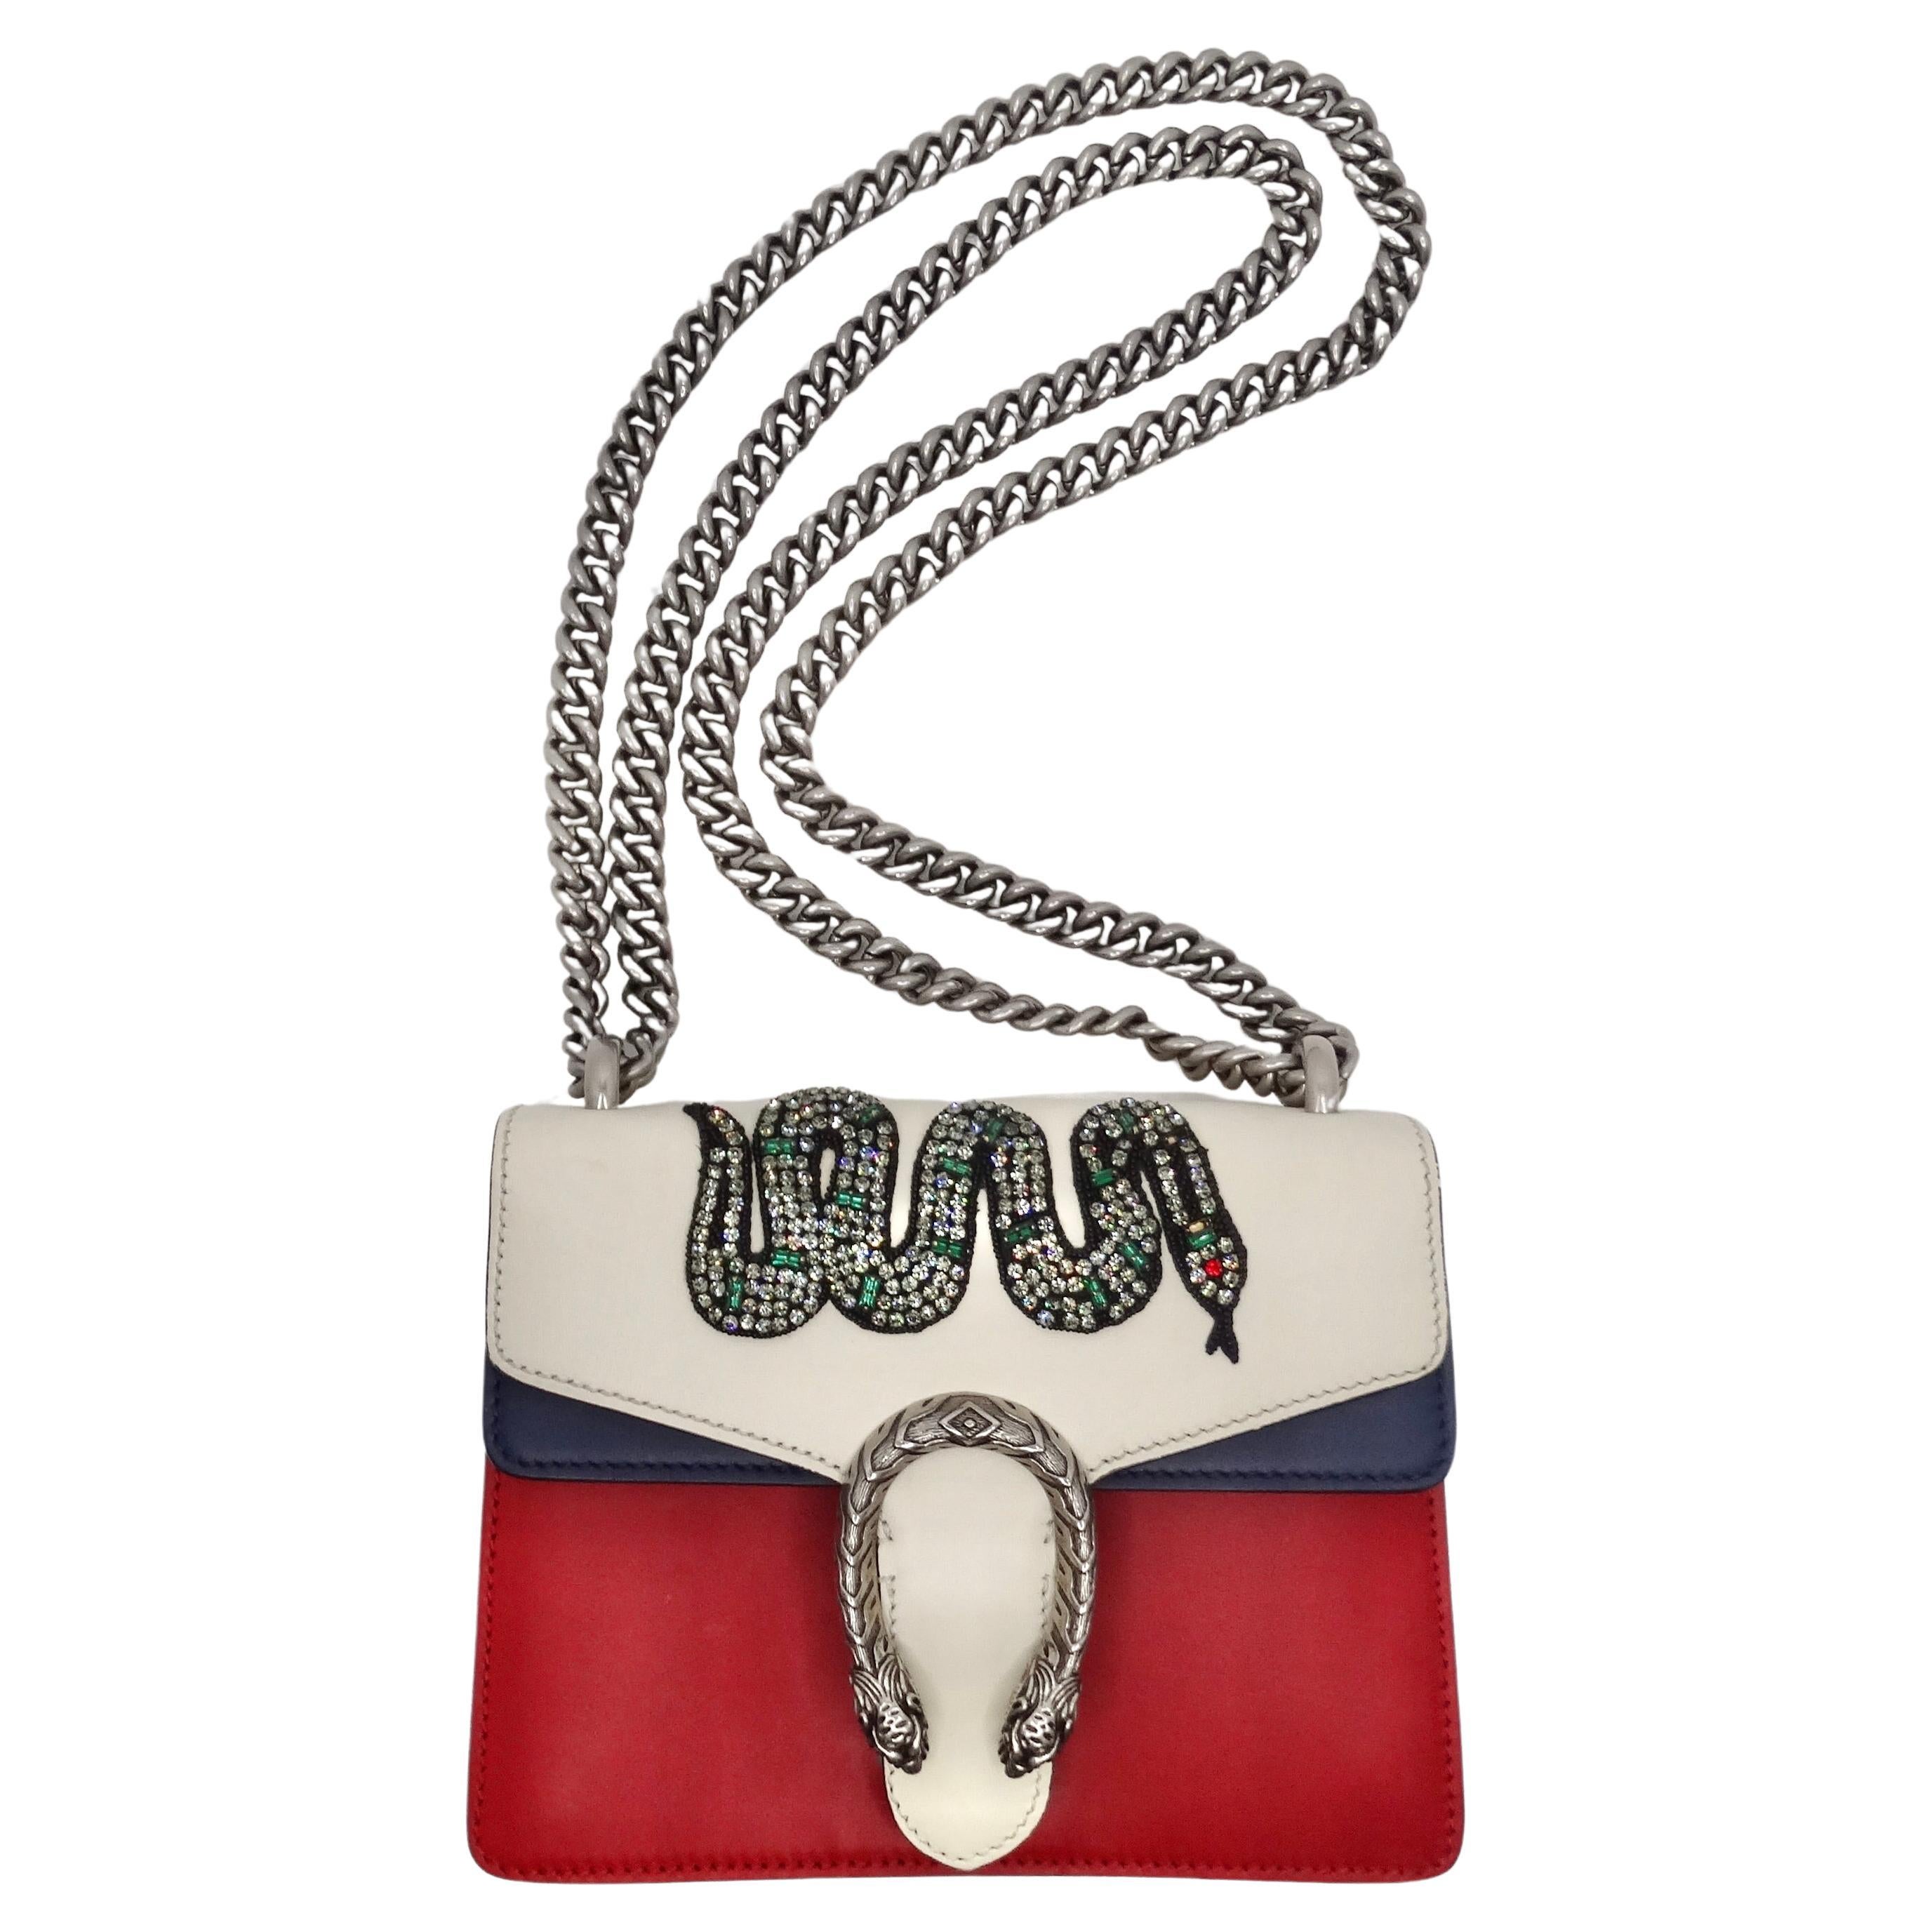 Introducing the Gucci Multicolor Leather Mini Crystal Snake Embroidered Dionysus Bag – a stunning fusion of artistry and luxury that makes an unforgettable statement. Crafted from red, white, and navy blue leather, this handbag is adorned with an